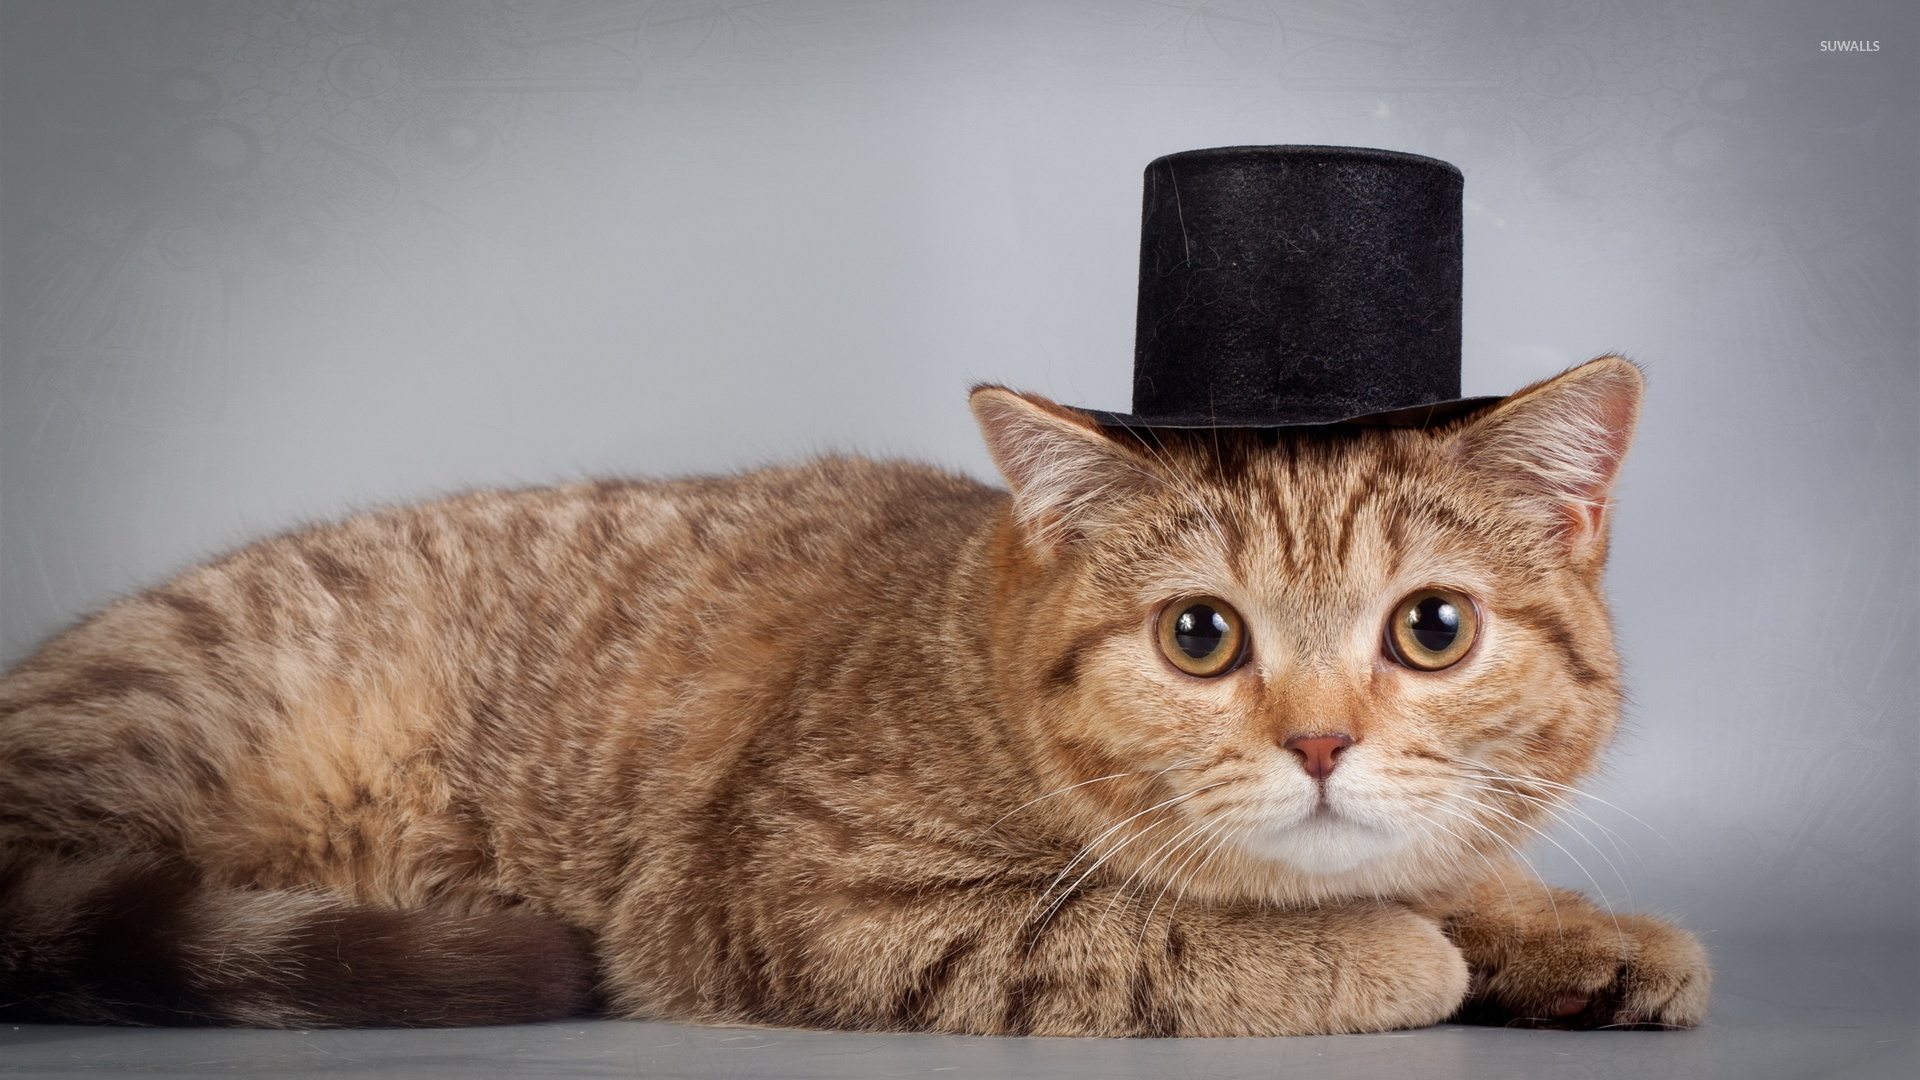 Cat with a hat wallpaper - Animal wallpapers - #42223